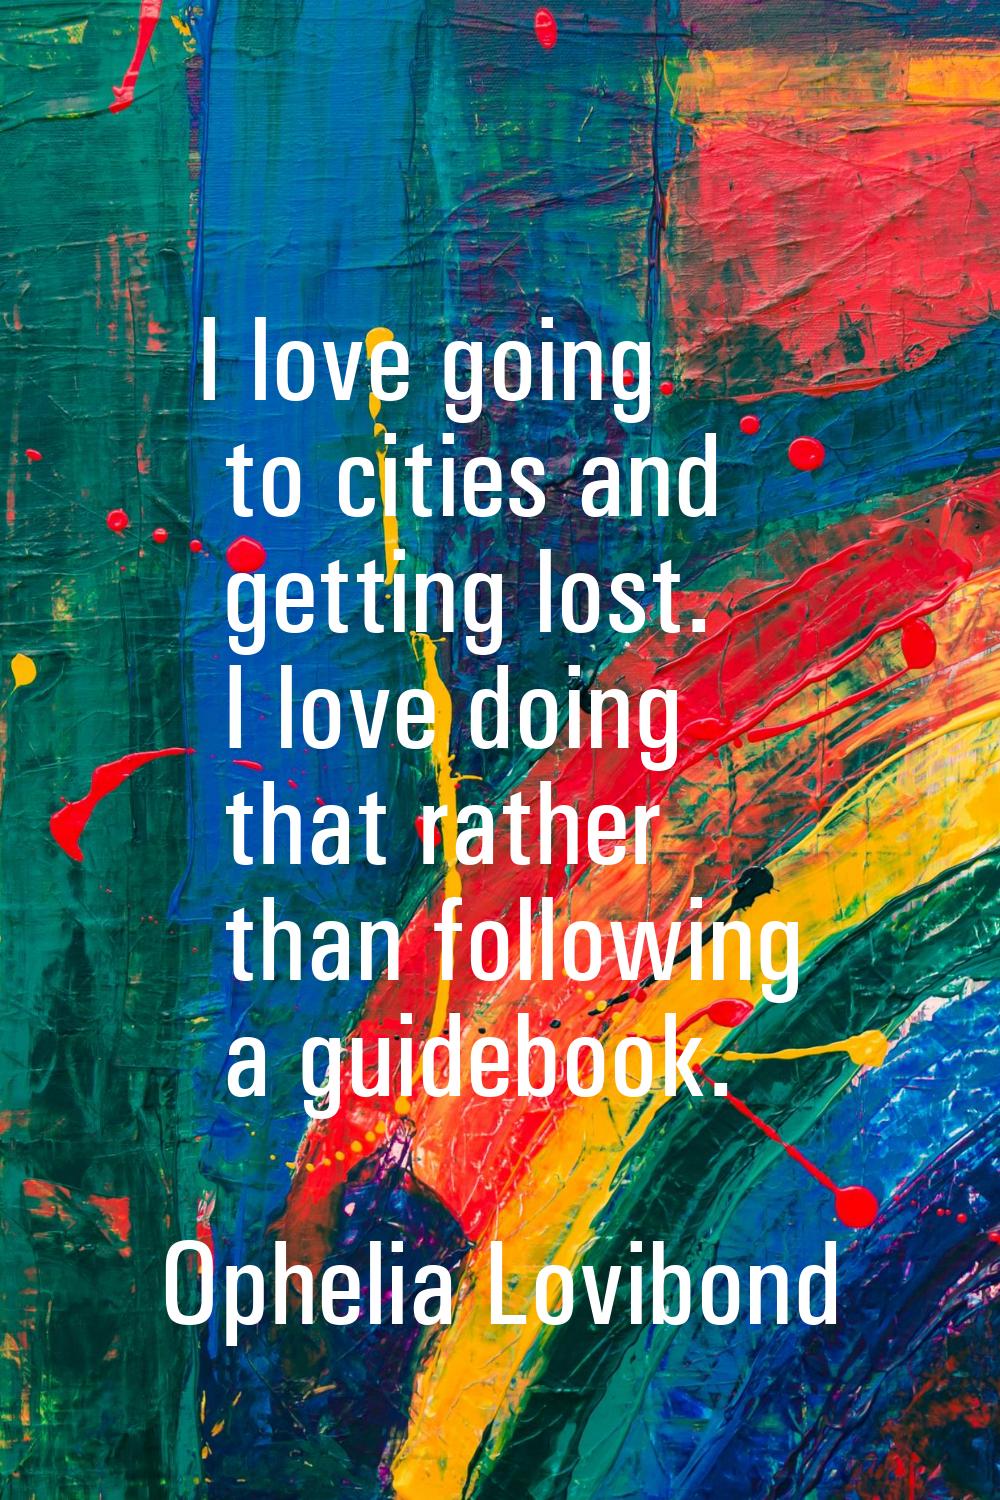 I love going to cities and getting lost. I love doing that rather than following a guidebook.